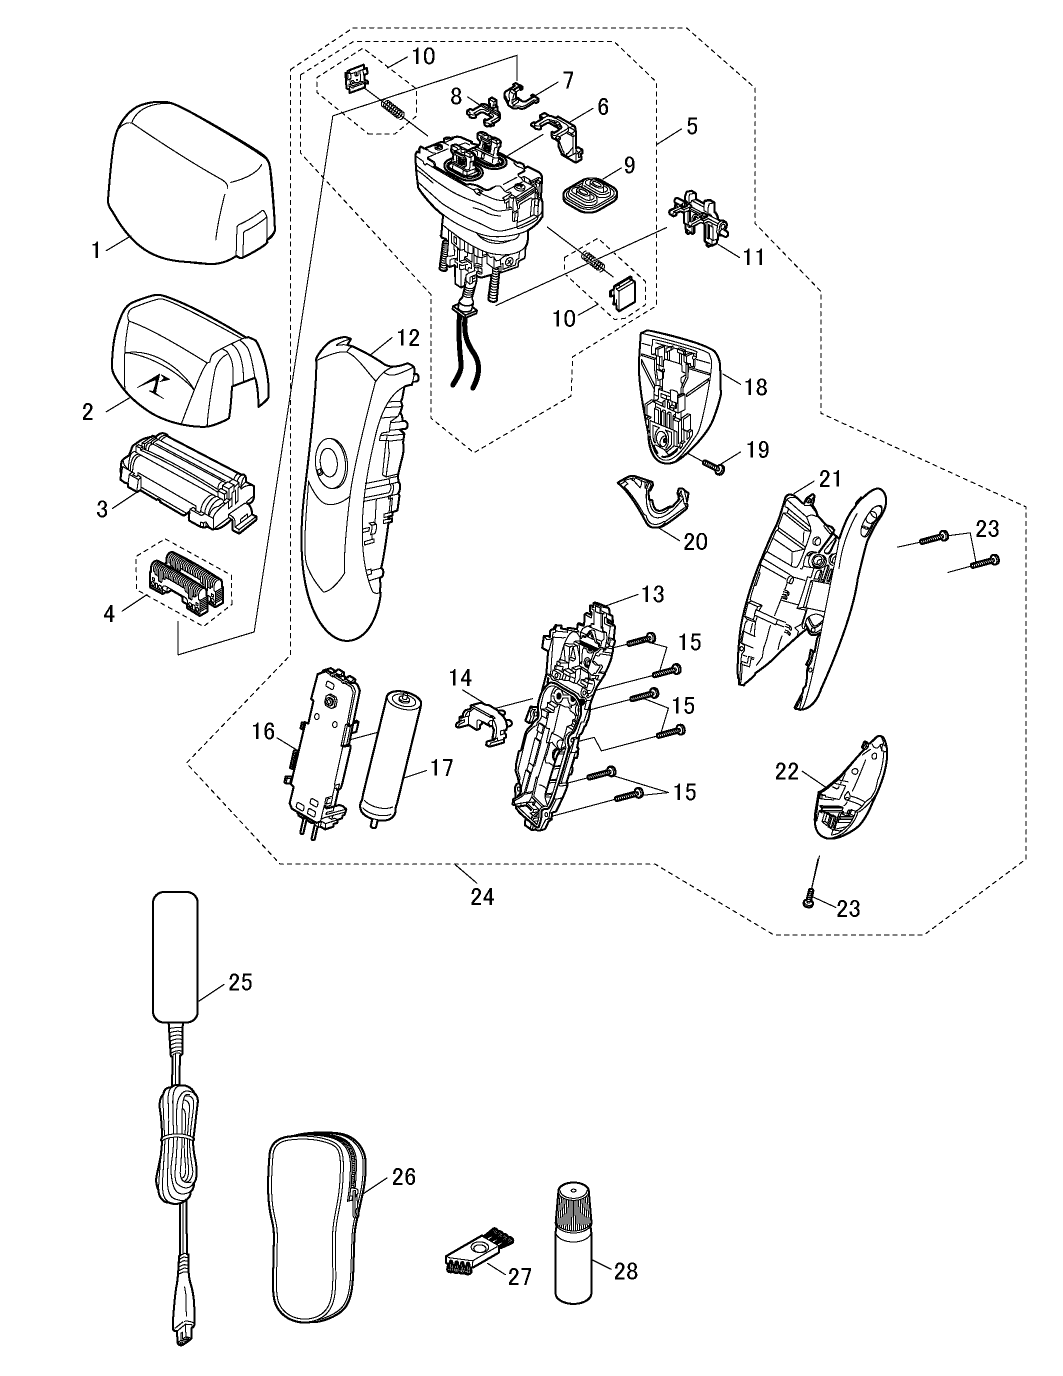 ES-LF51: Exploded View